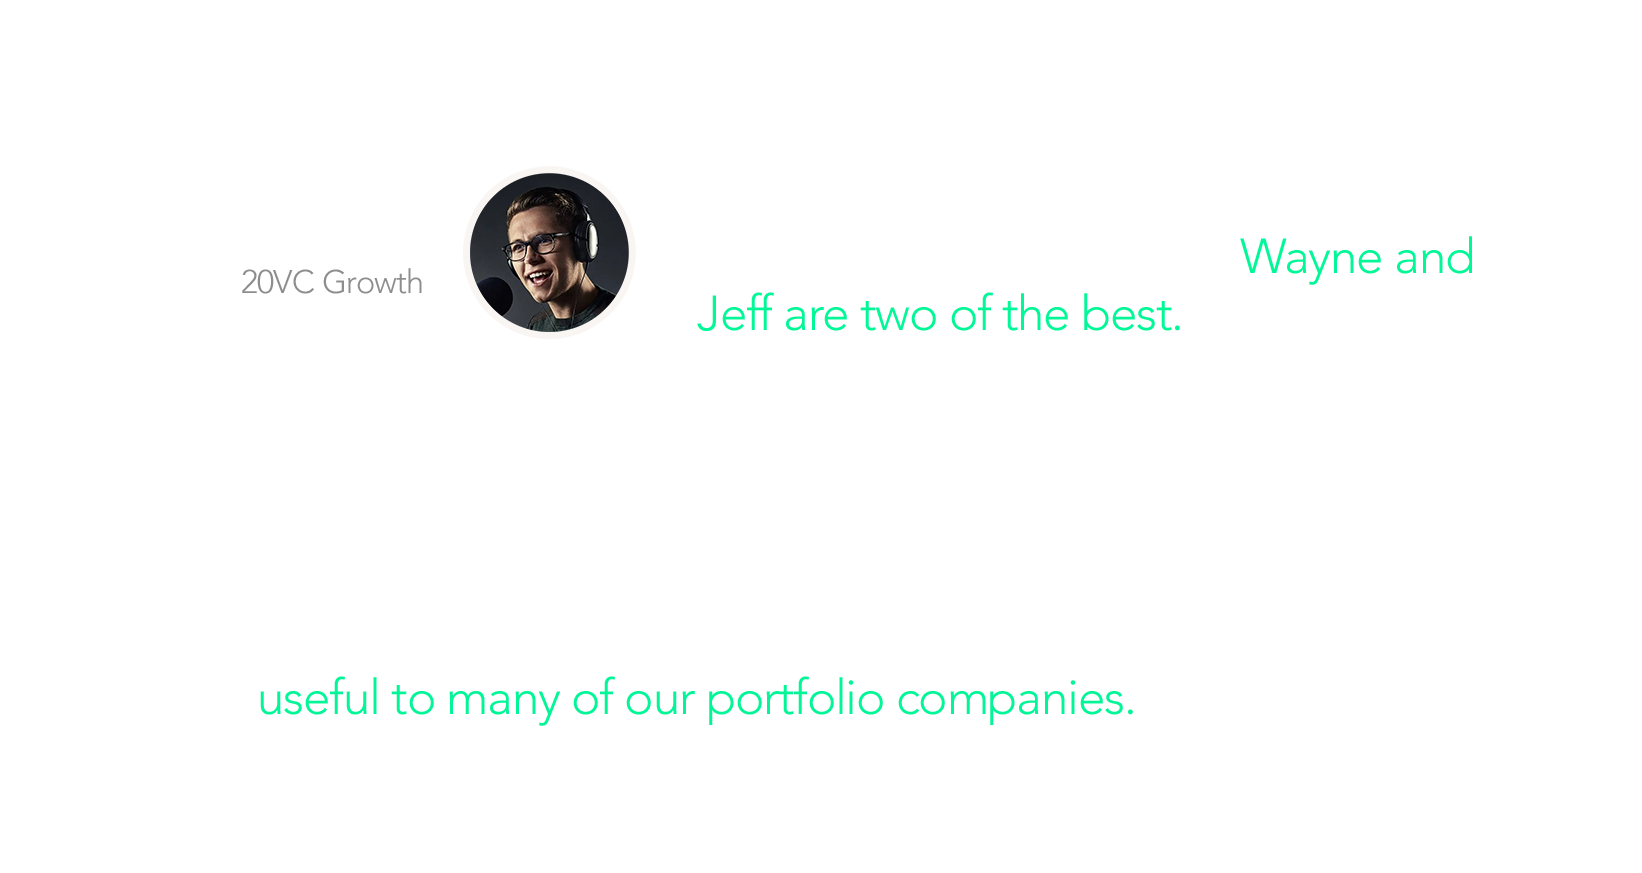 'I have interviewed over 1,000 of the best founders in the world and Wayne and Jeff are two of the best' - Harry Stebbings, 20VC Growth. 'We believe that Digits has the potential to change how small businesses digest financial information and be useful to many of our portfolio companies.' - Softbank